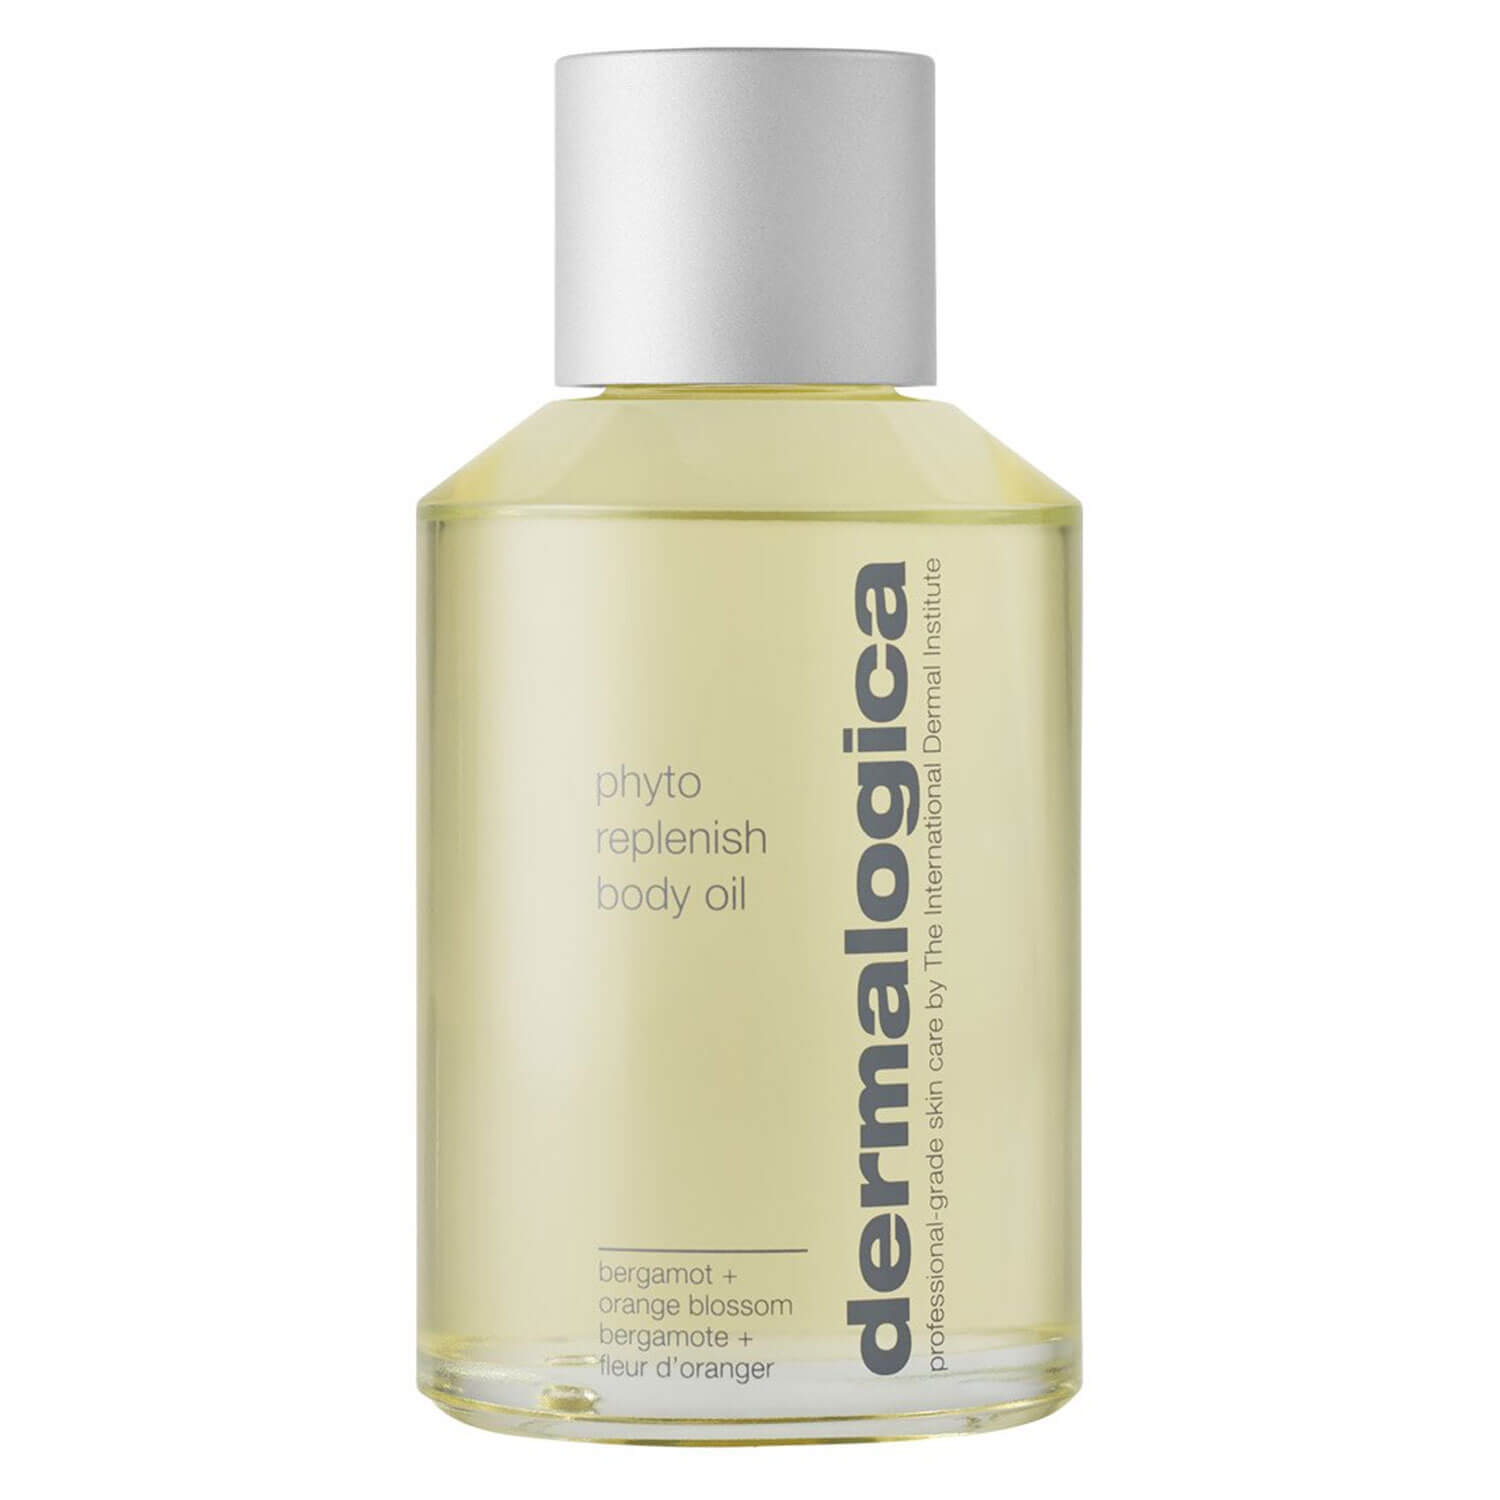 Product image from Dermalogica Body - Phyto Replenish Body Oil